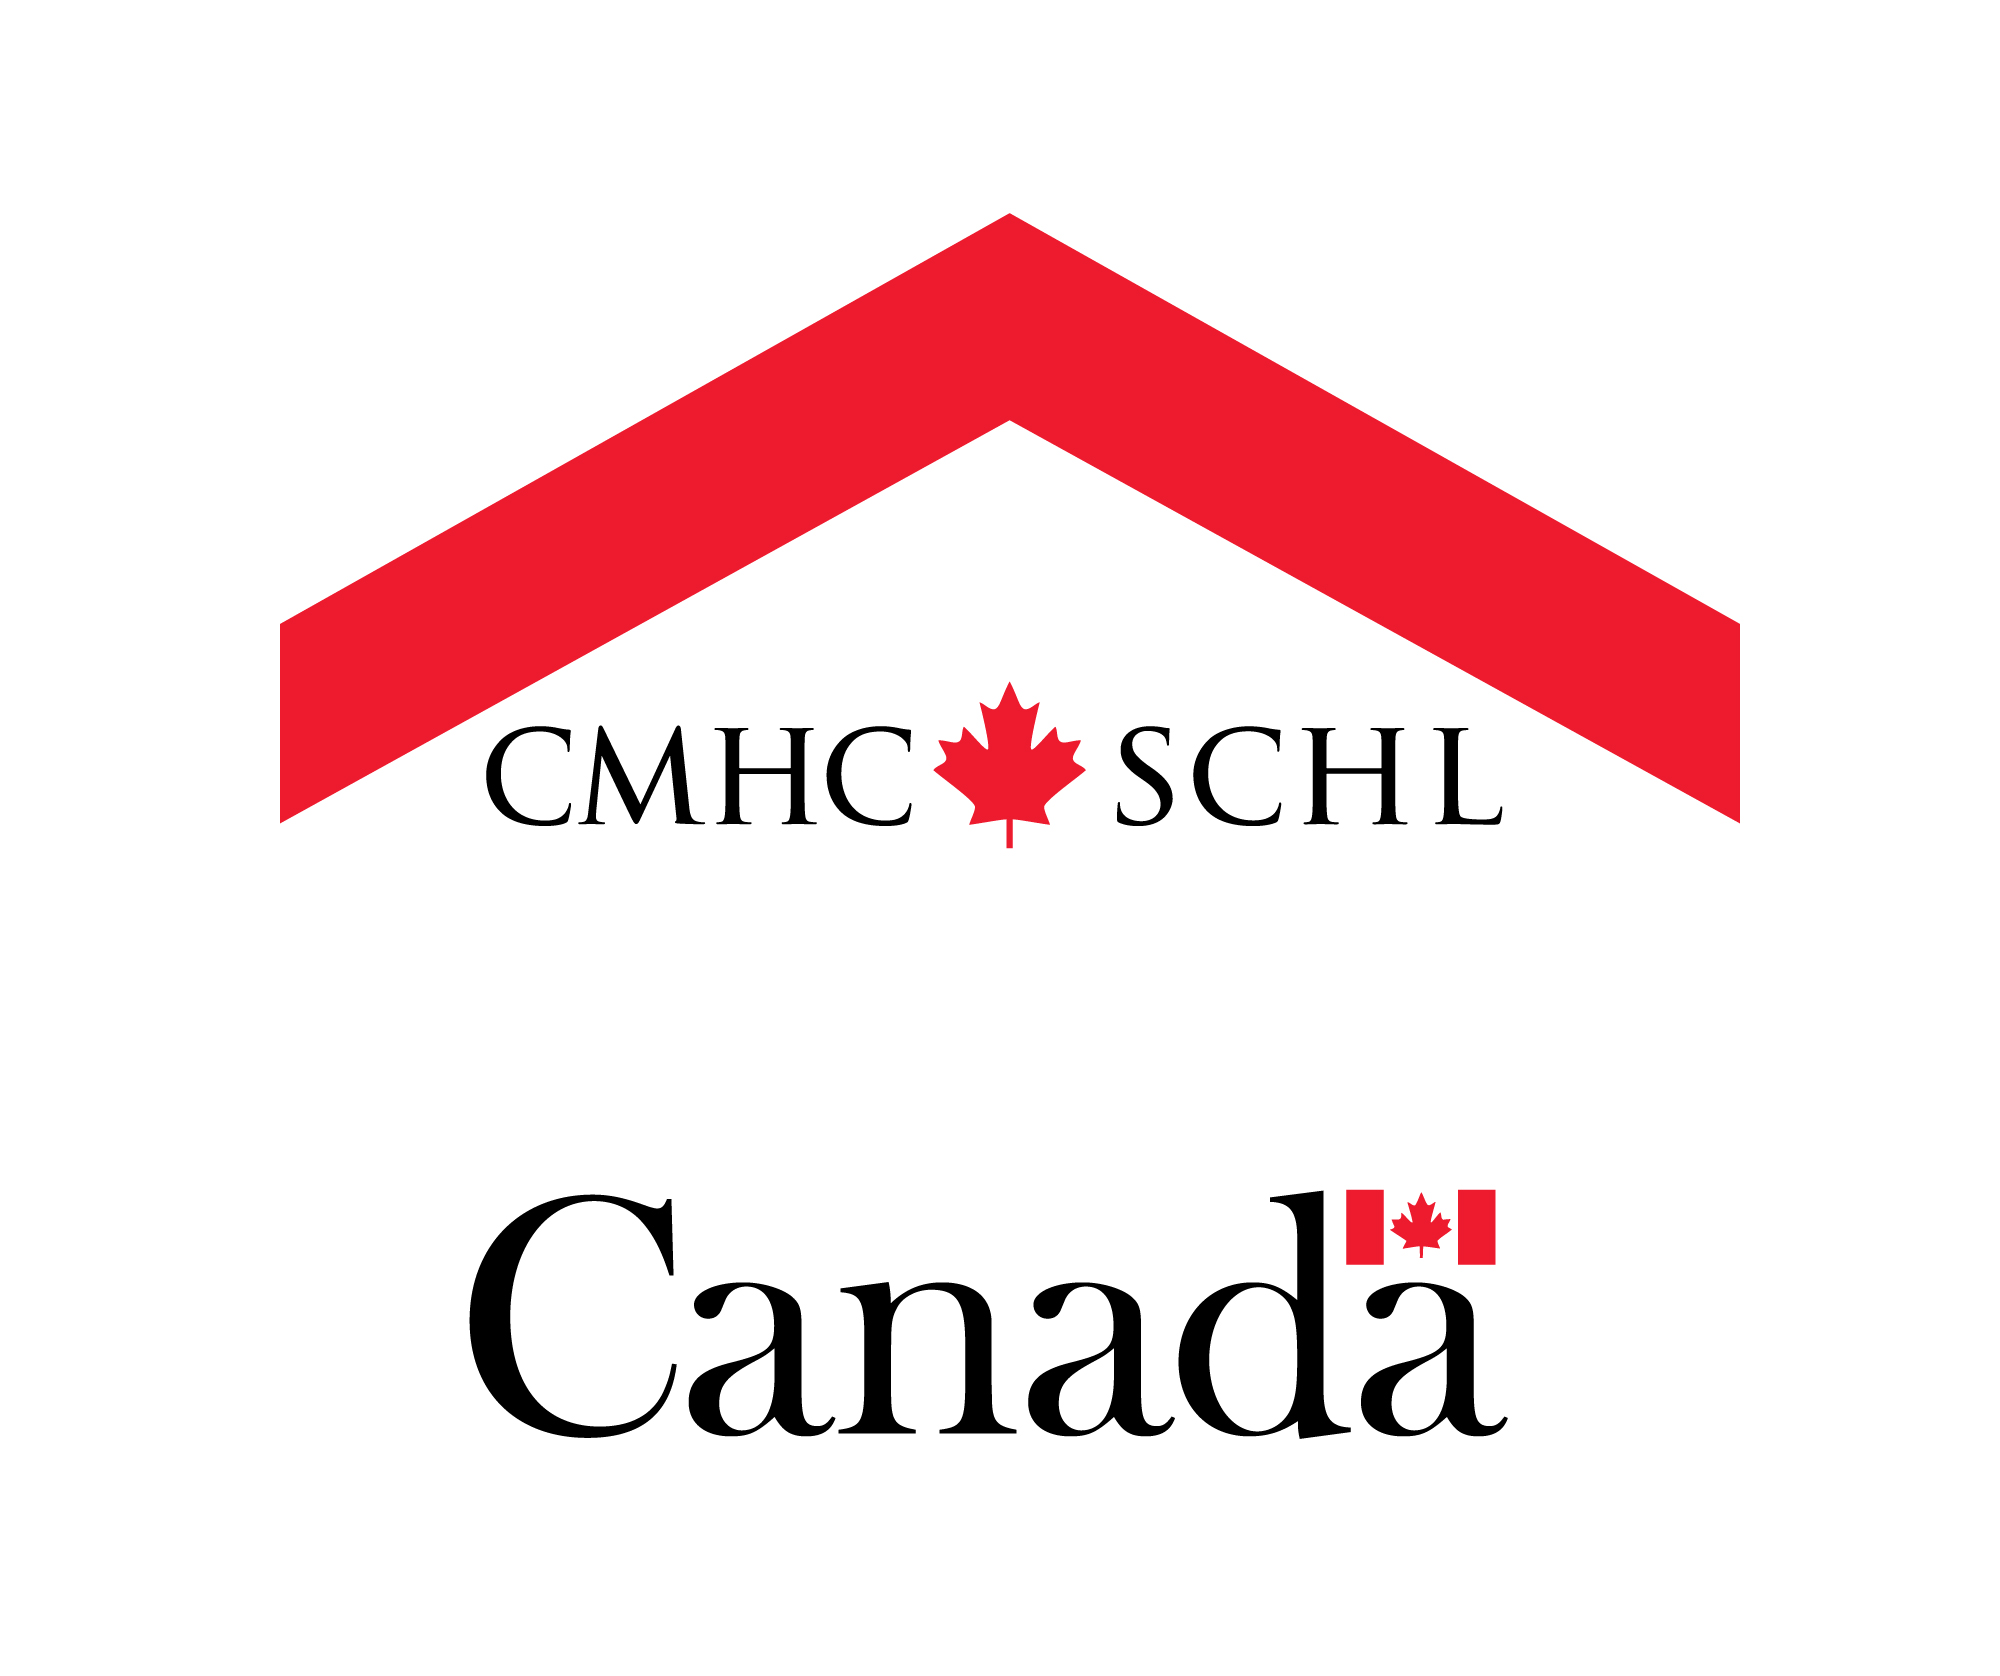 INCREASING THE SUPPLY AND AFFORDABILITY OF CANADA’S RENTAL HOUSING